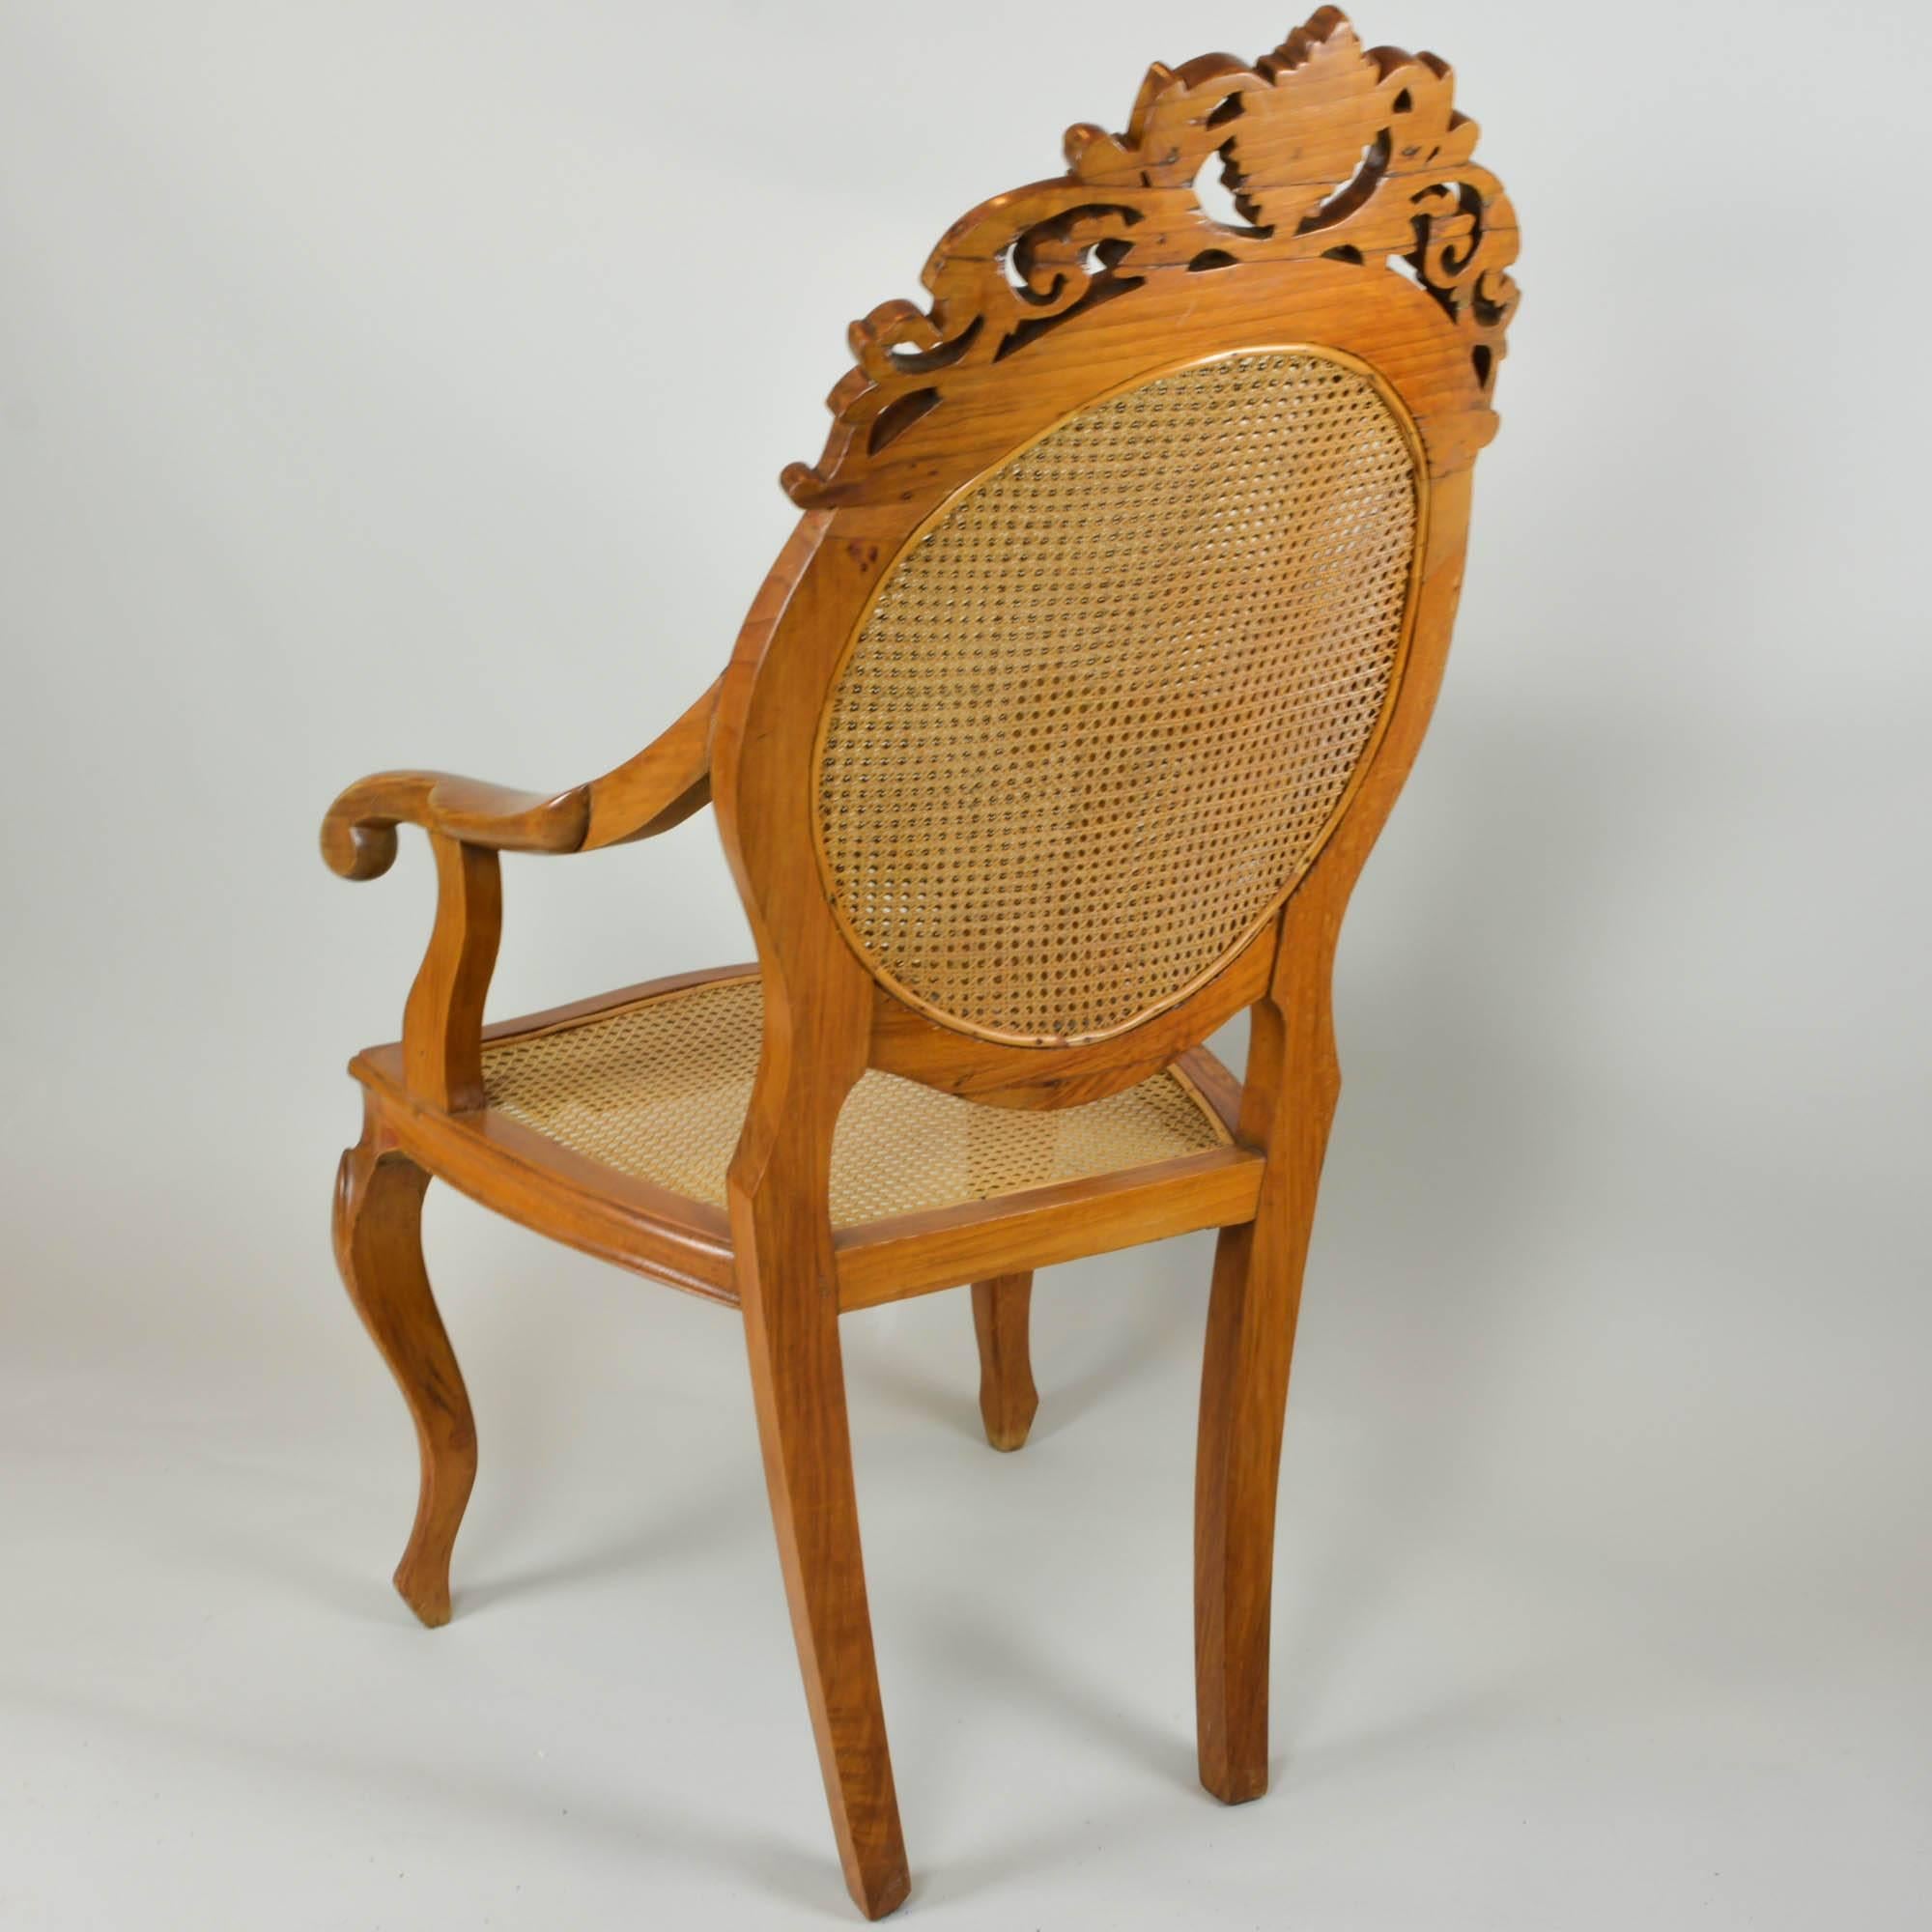 Vintage Carved Accent Chair with Caned Seat and Back In Excellent Condition For Sale In Pataskala, OH